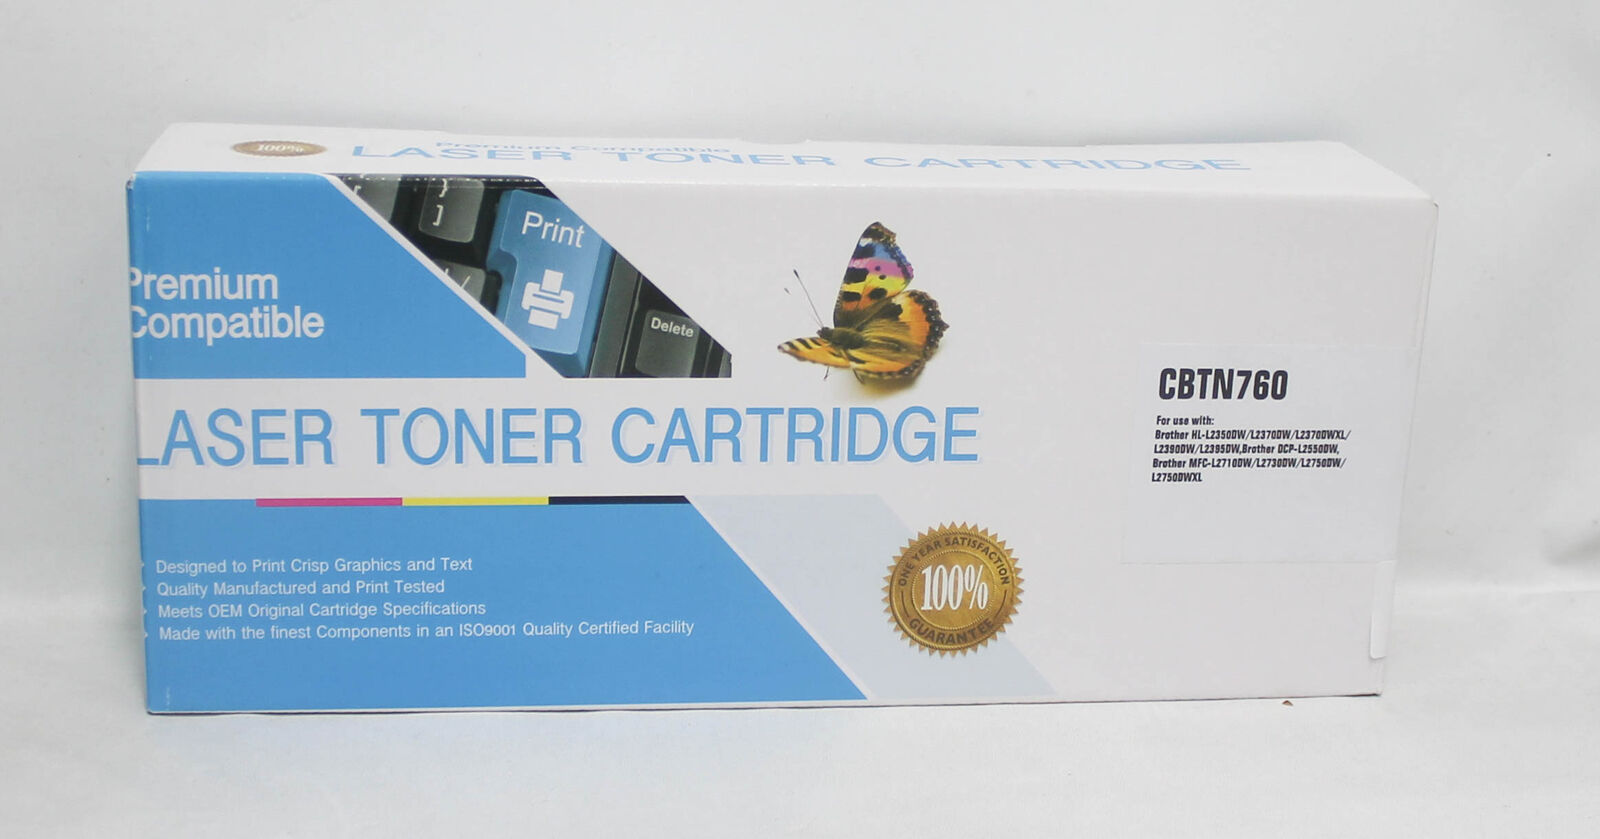 CBTN760 Laser Toner Cartridge For Use With Brother Hl-L2350Dw L2370Dw\